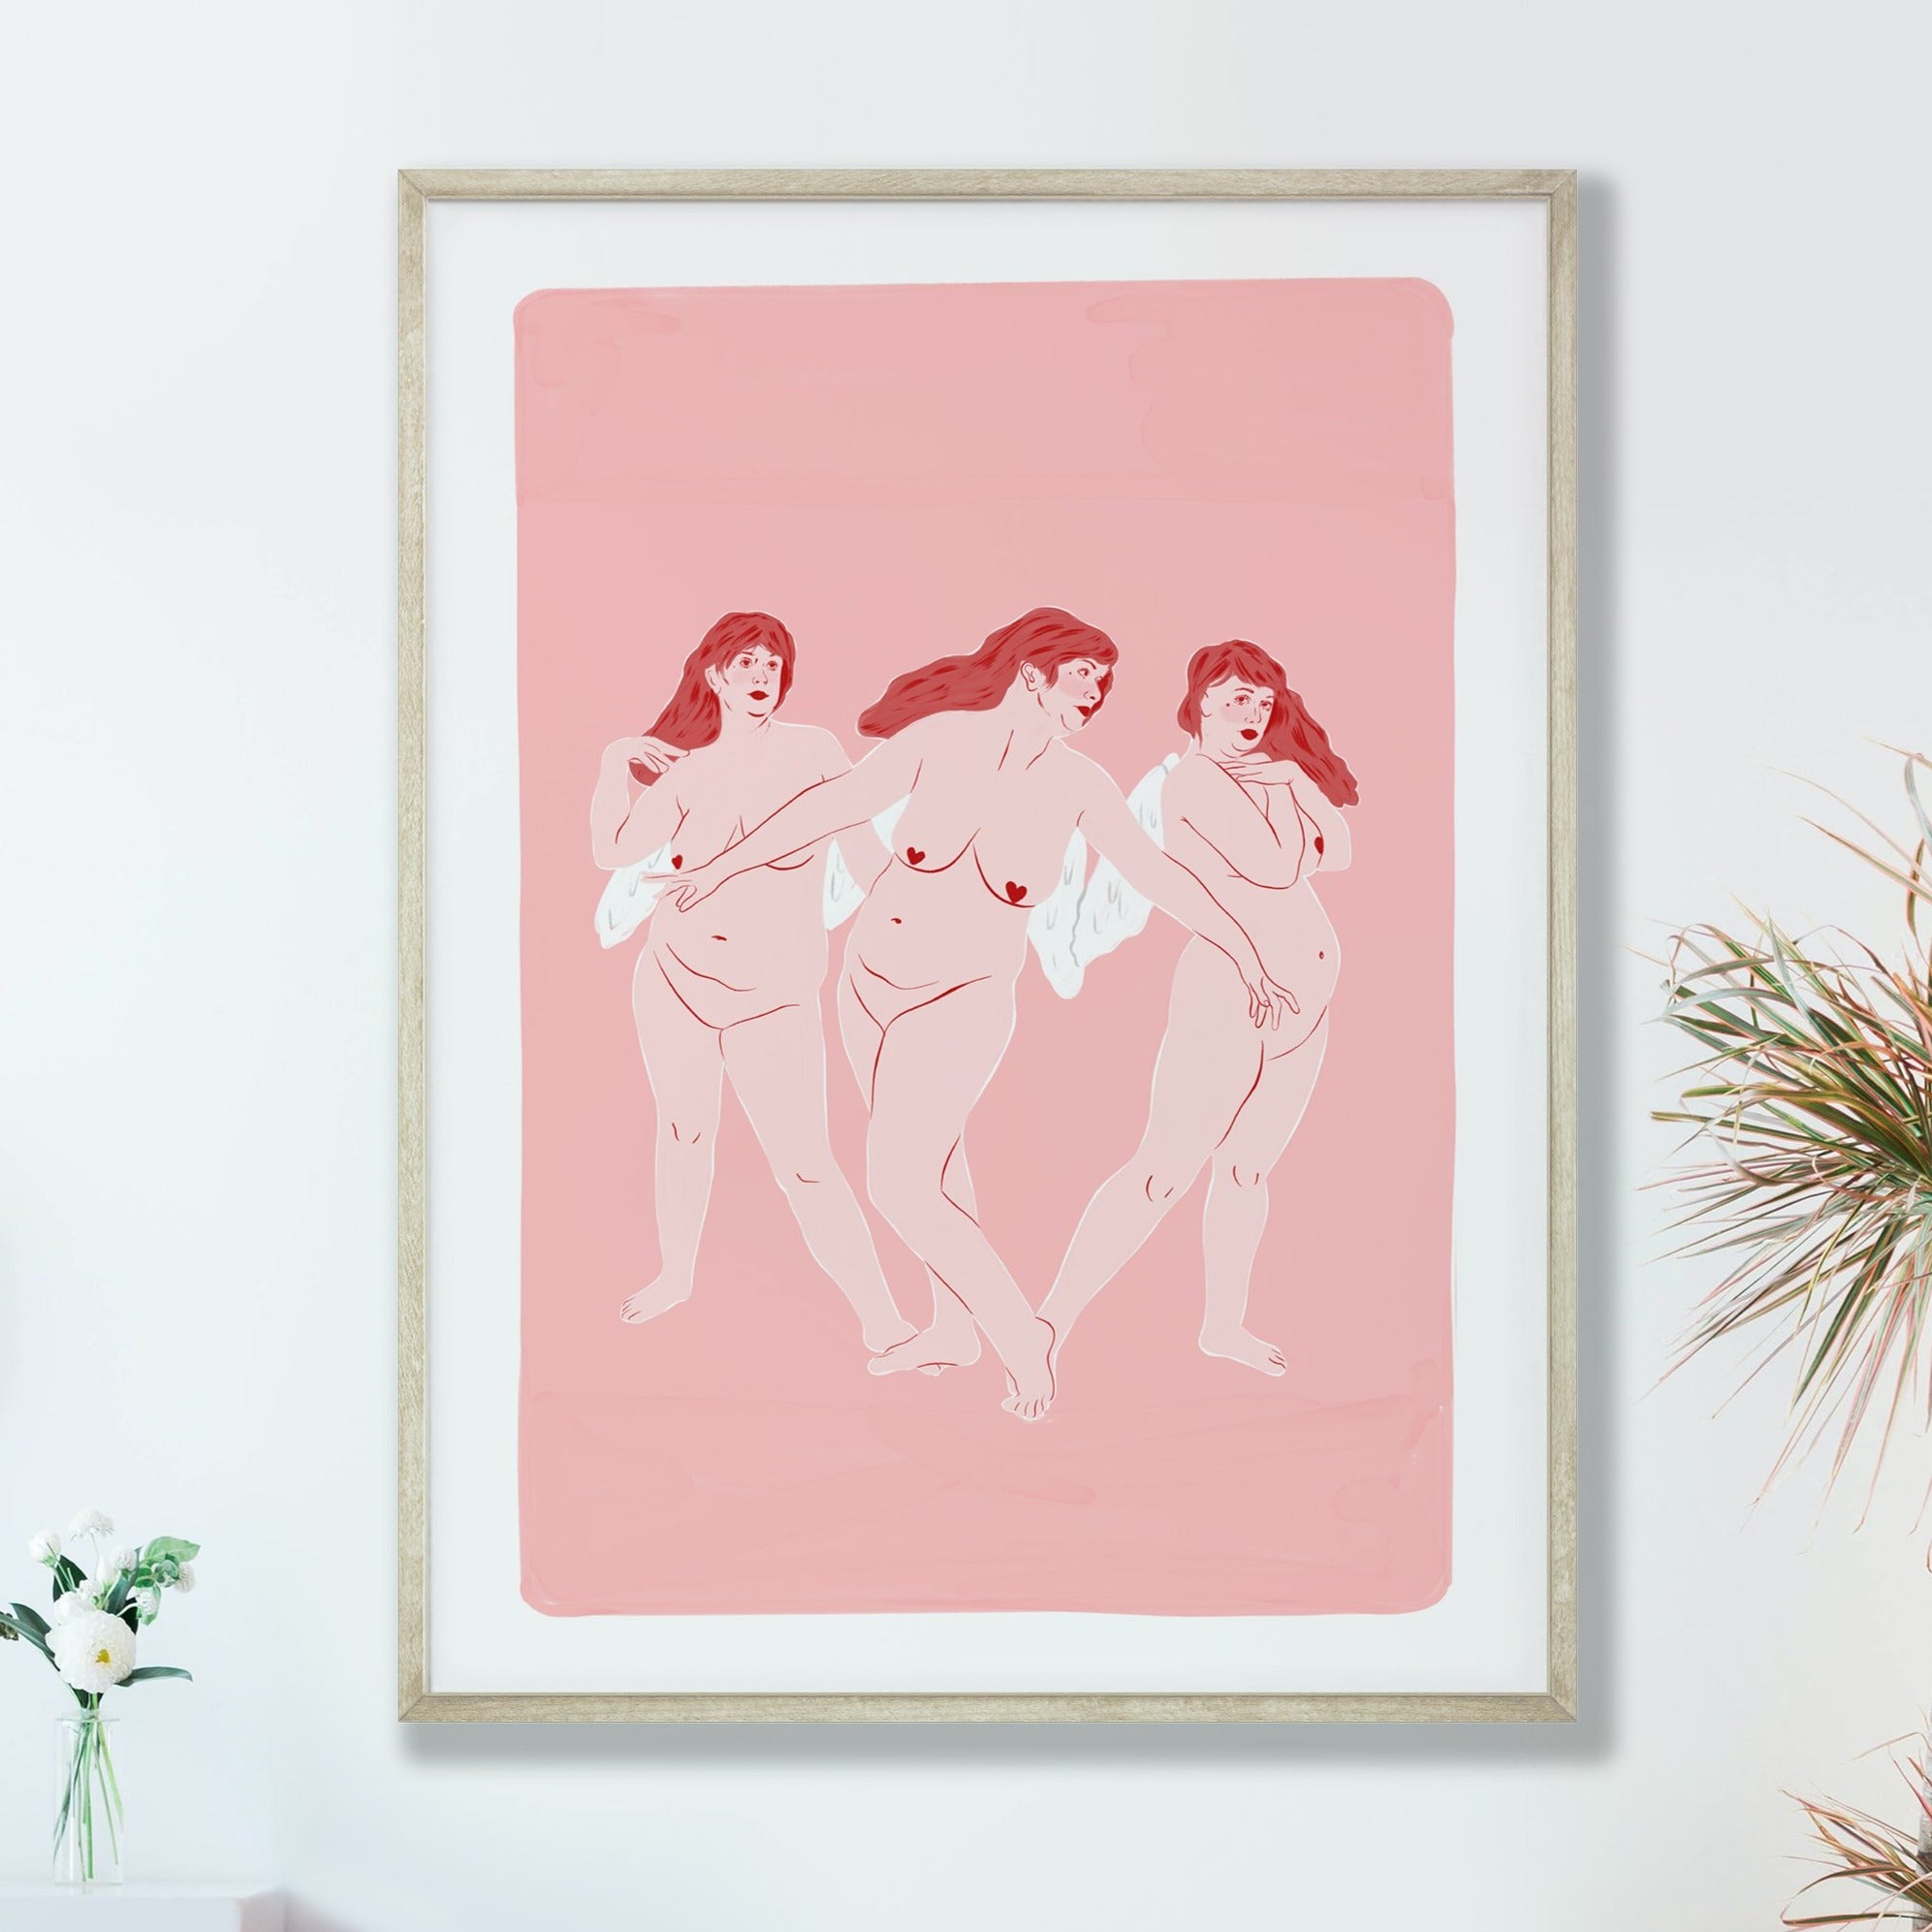 image of three nude ladies painted in gouache framed on a white wall background. Art by whatmabeldid